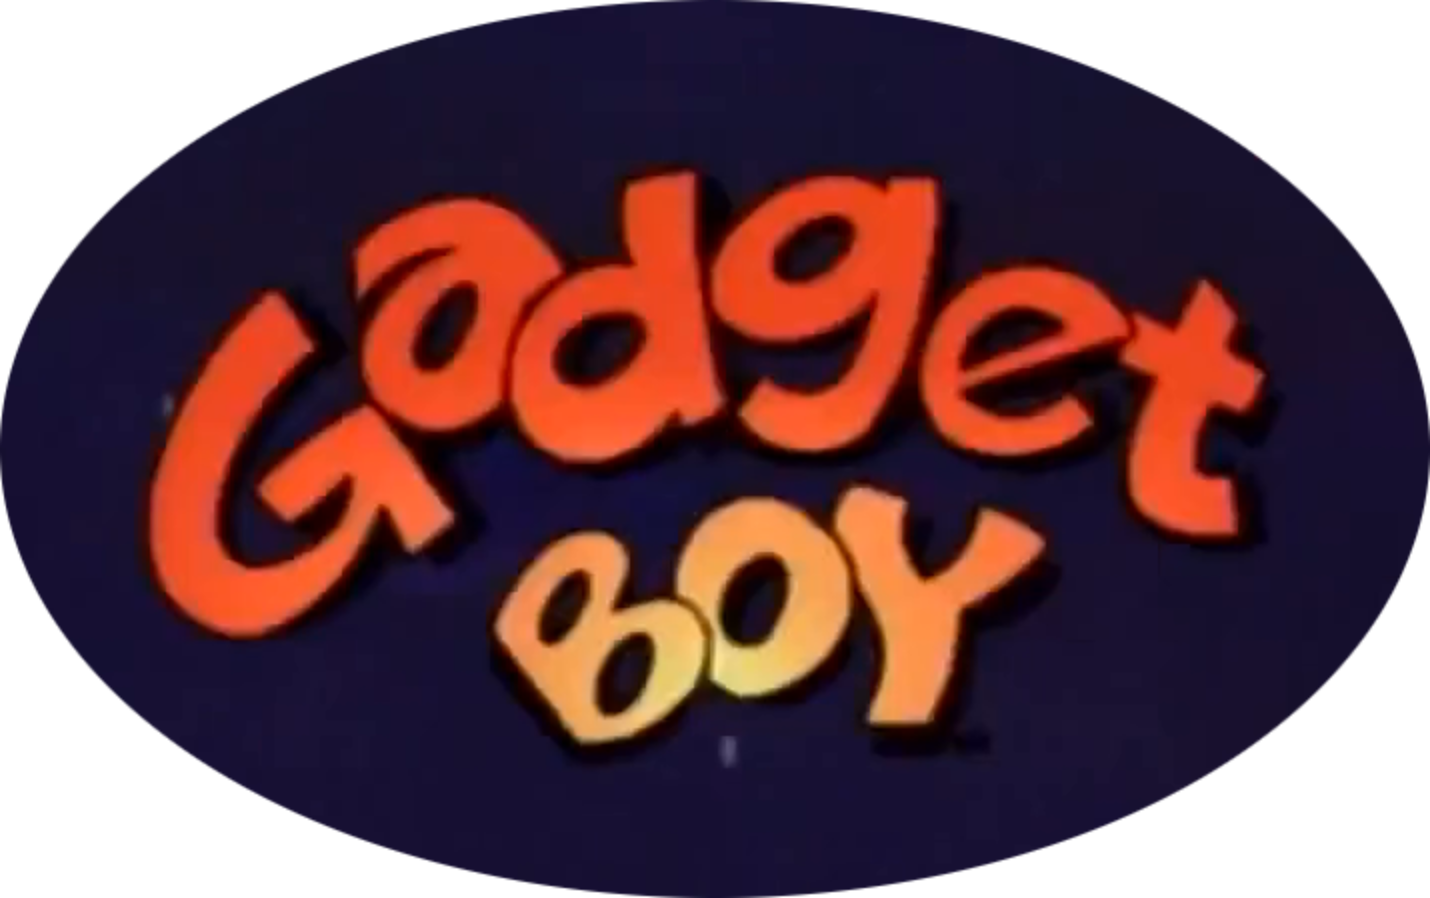 Gadget Boy and Heather Complete (6 DVDs Box Set)